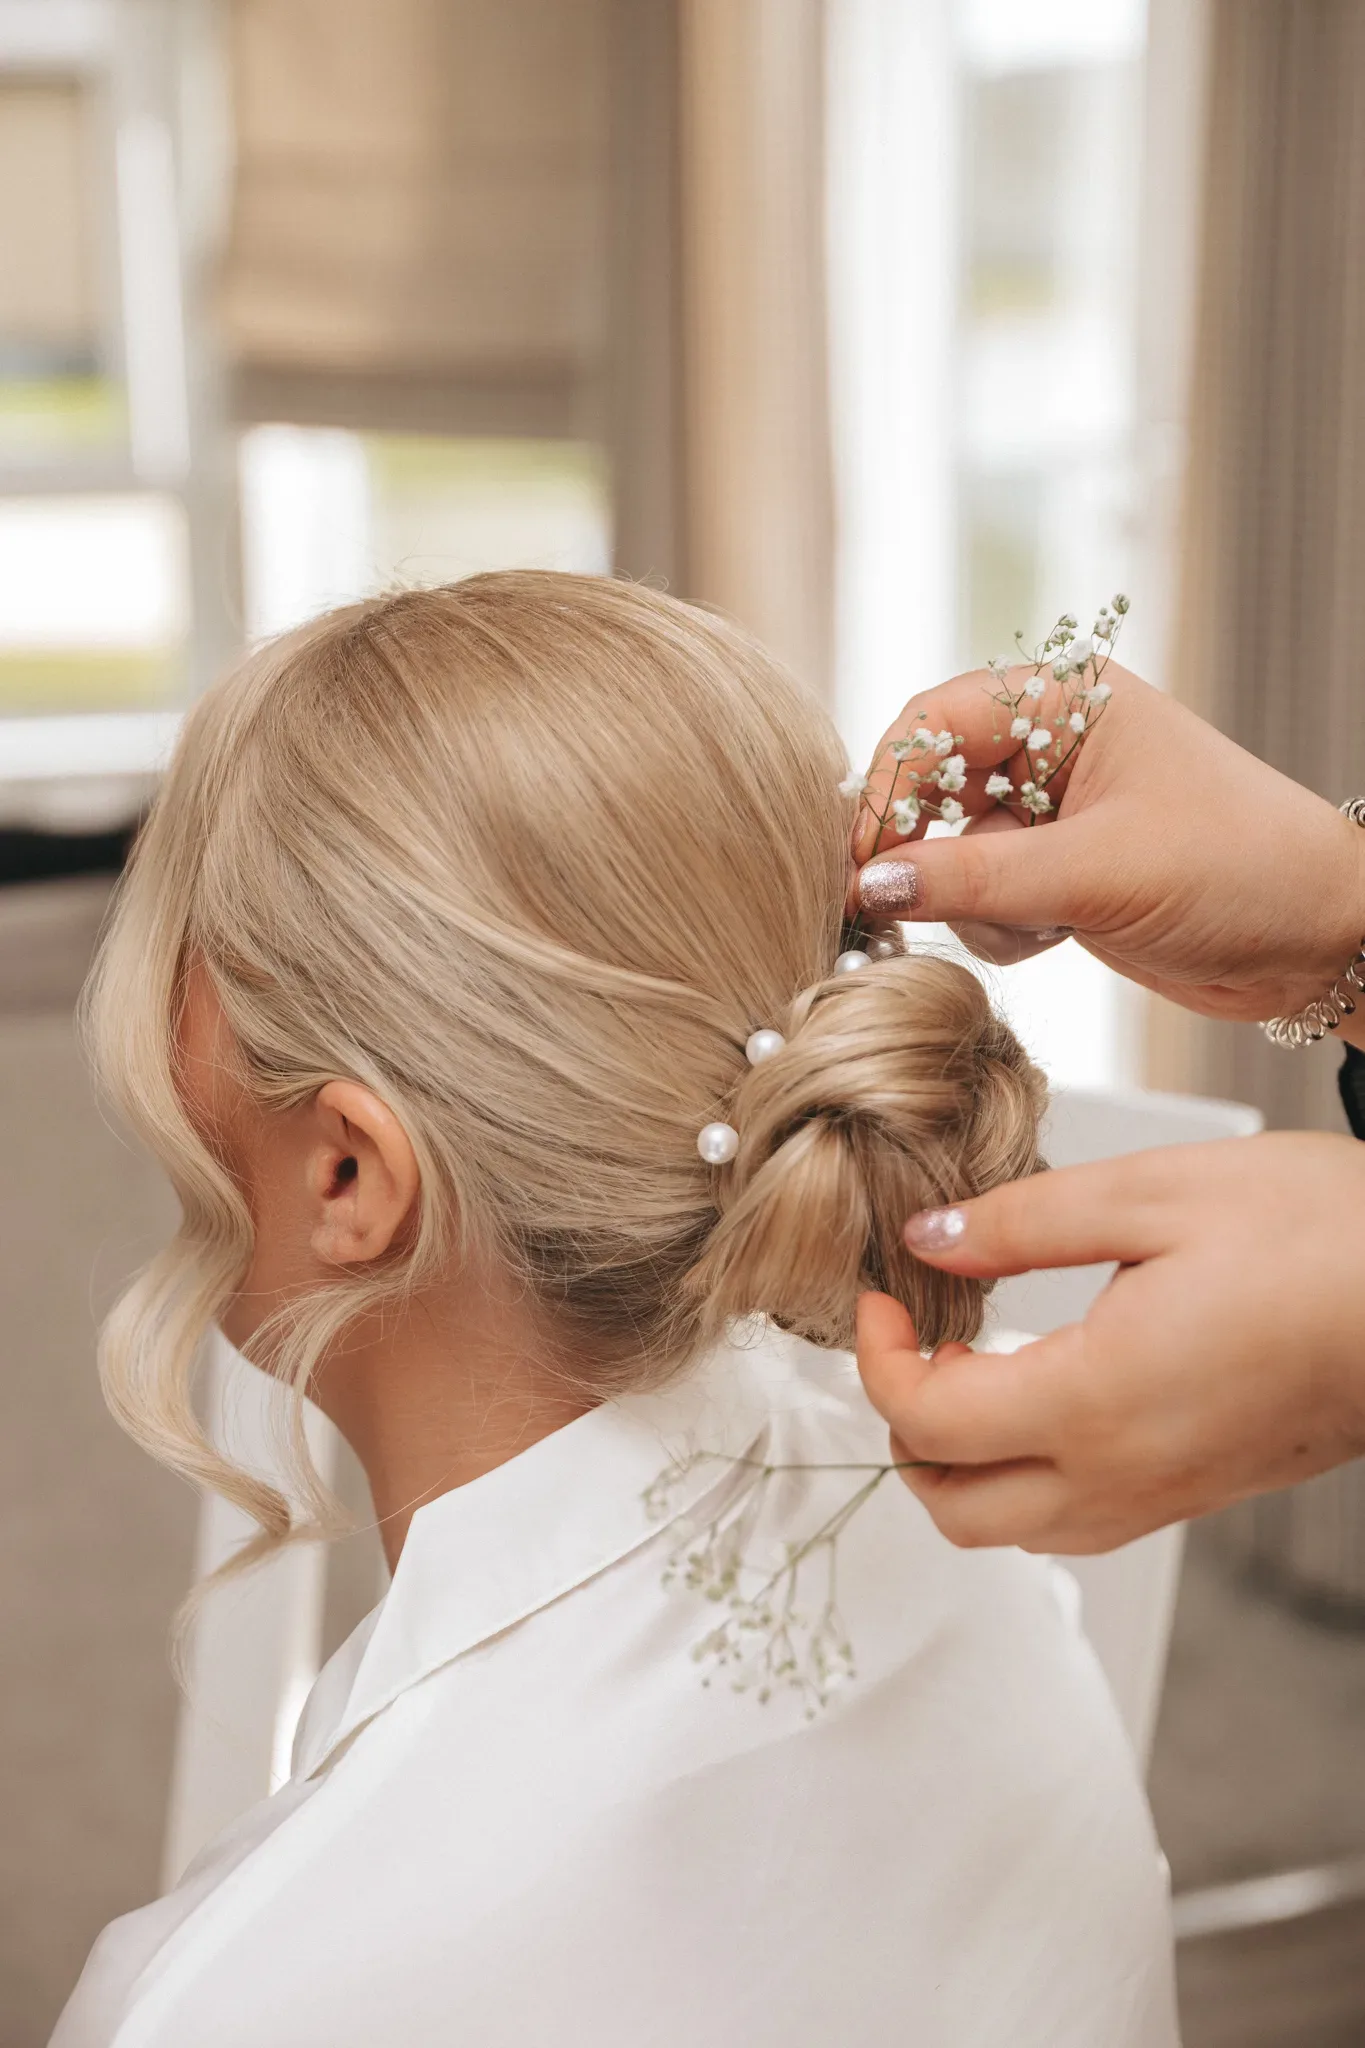 A hairstylist arranges a blonde woman's hair into an elegant updo, adding small white flowers and pearls. the setting suggests a bright, airy room.